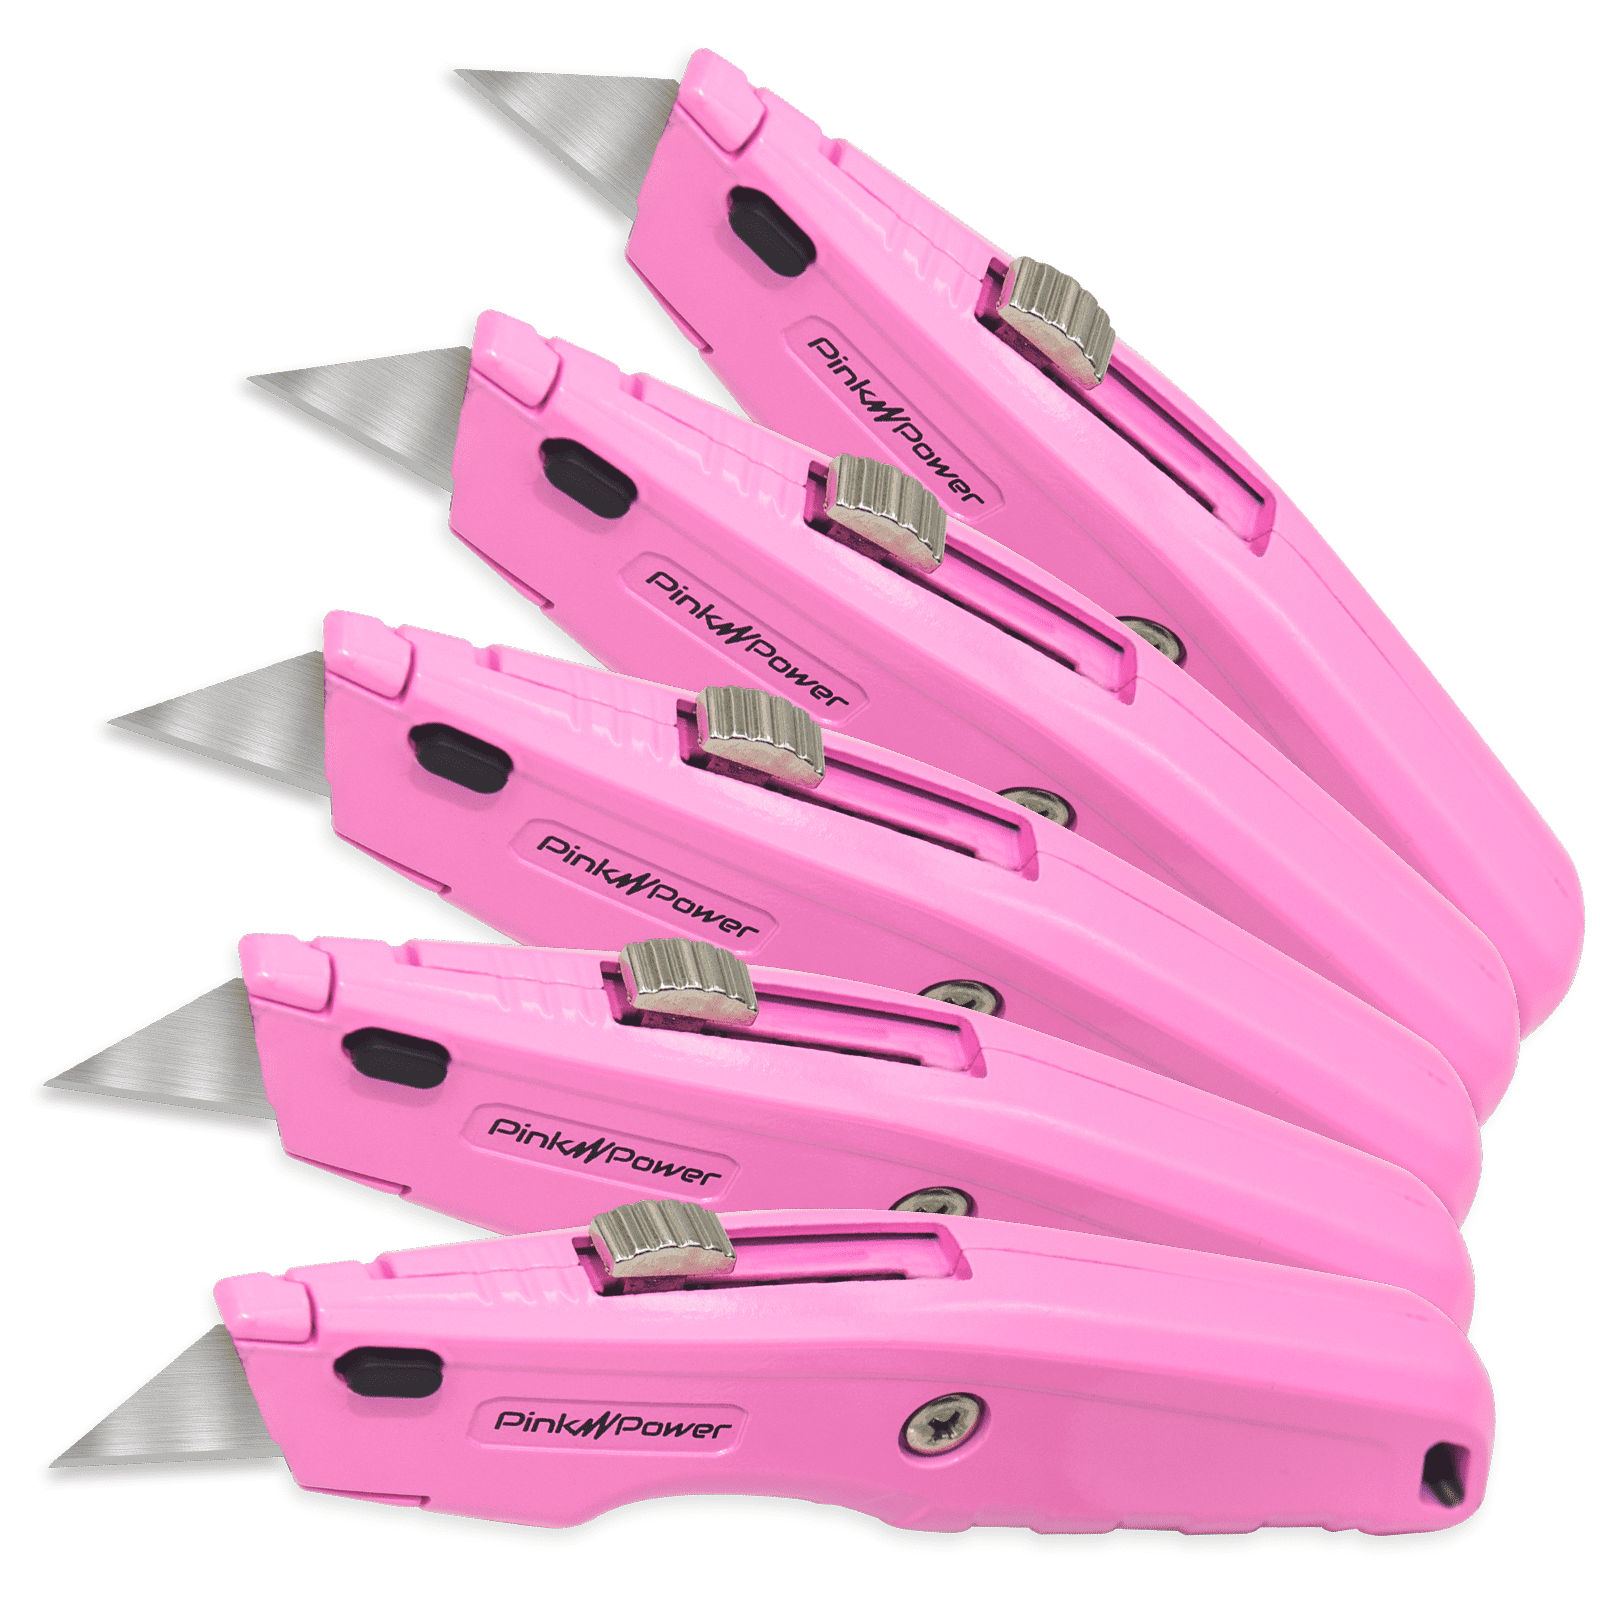 2 x Pink Utility Knife Box Cutter Ladies Snap Off Blade Tool +